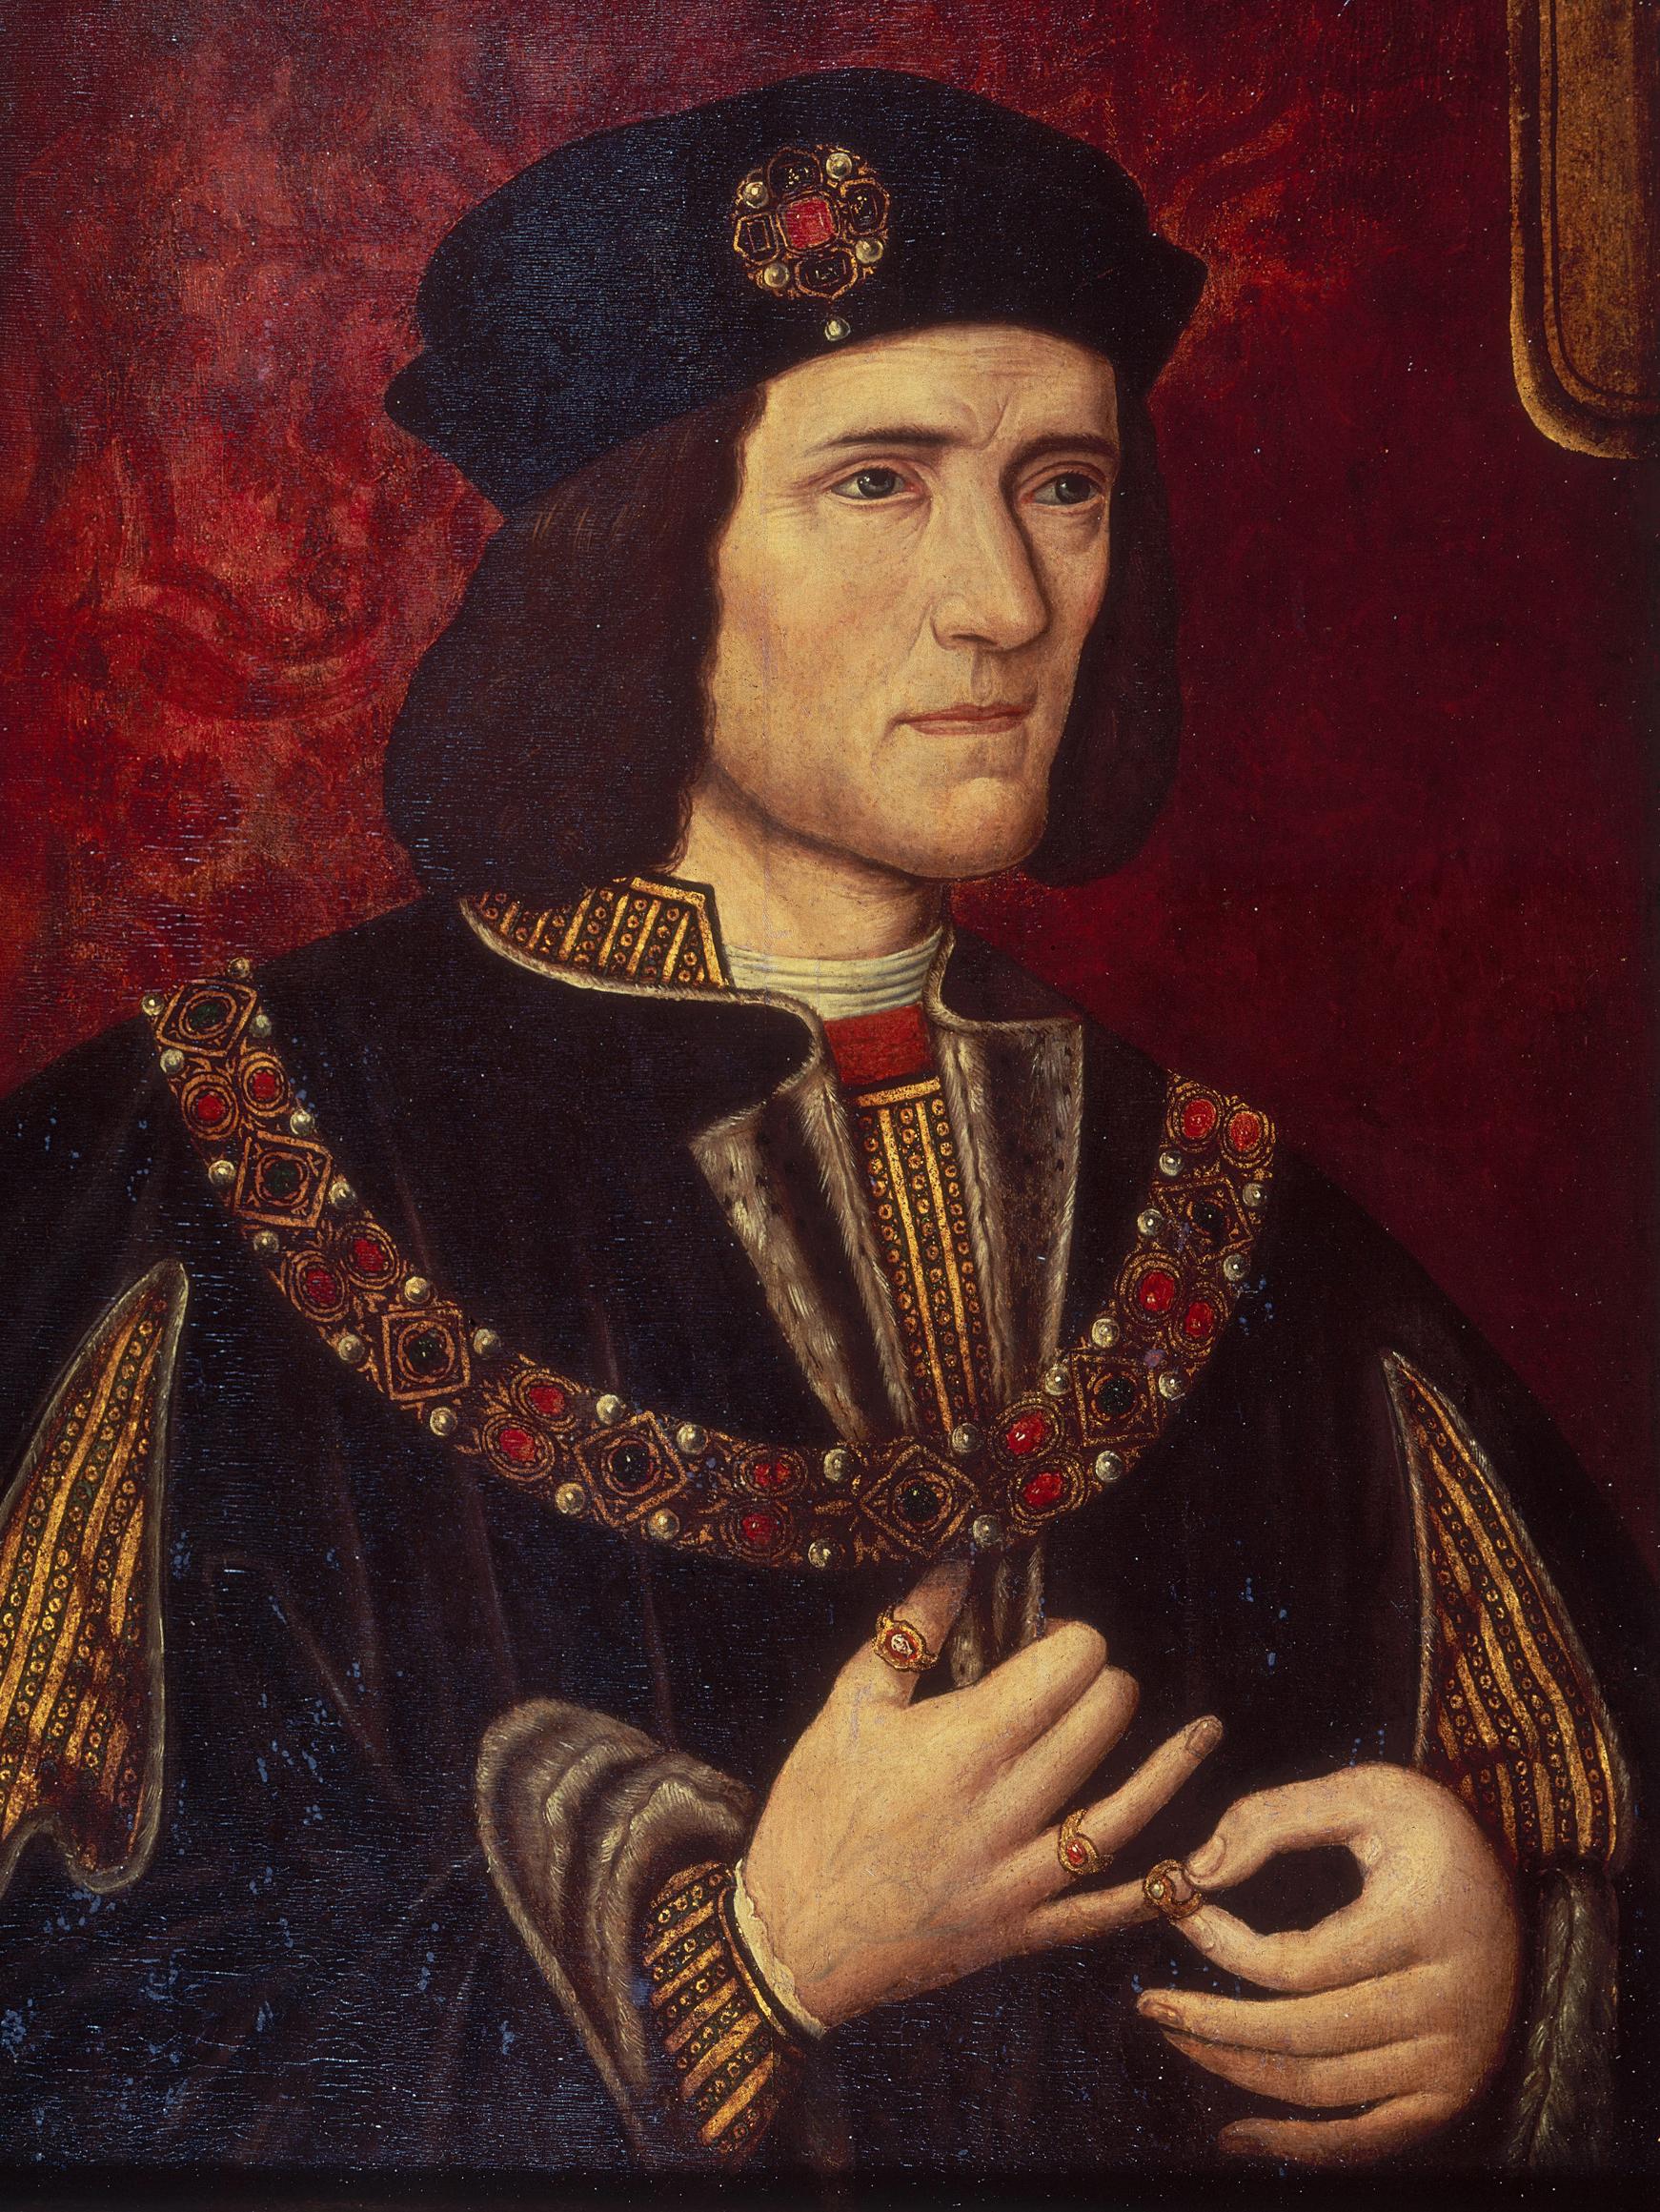 No Hunch Here: Richard III Suffered From Scoliosis Instead | West ...